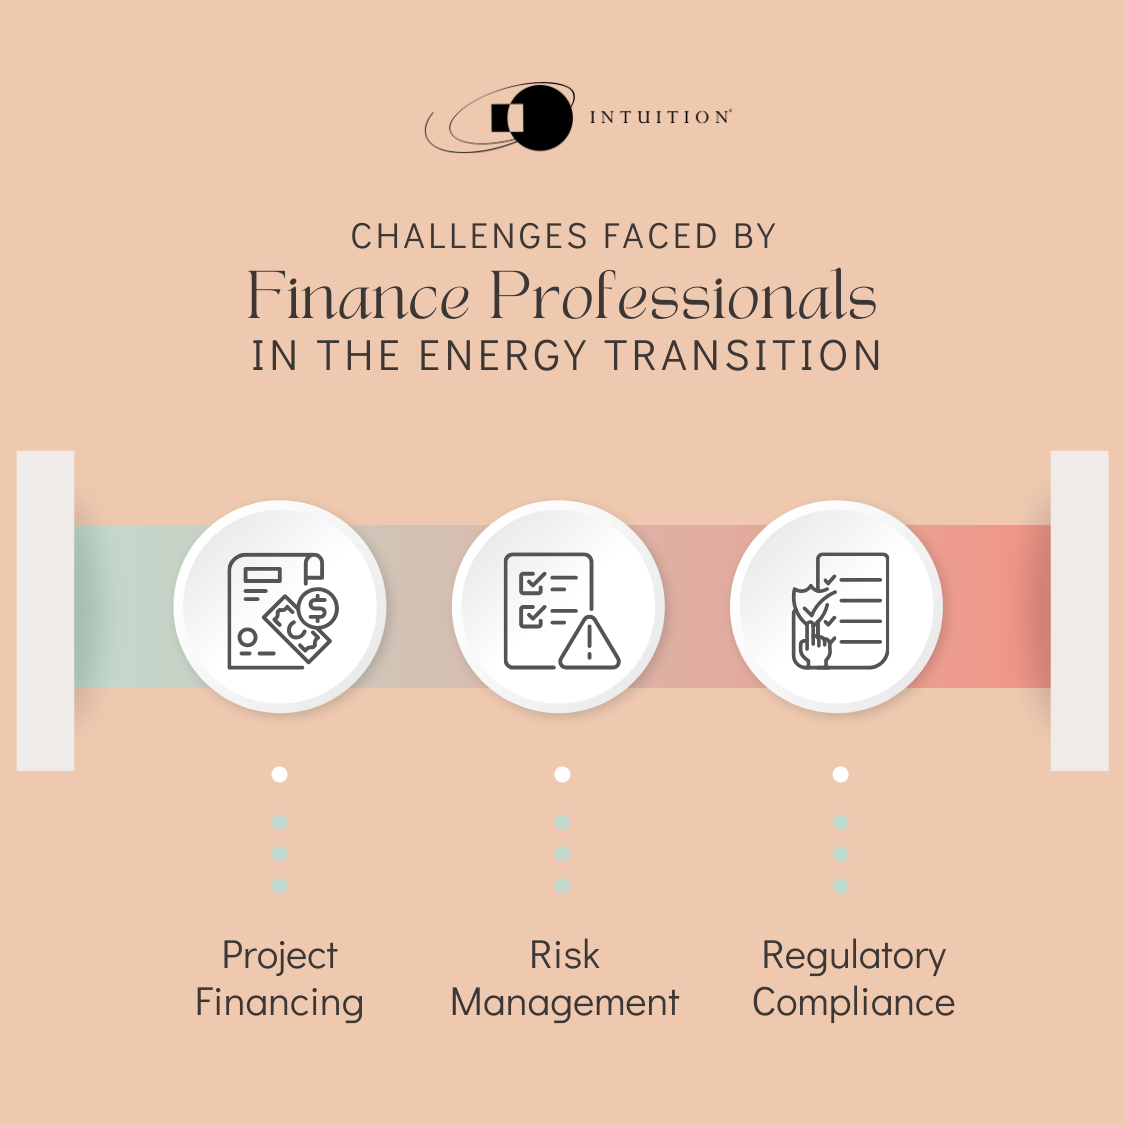 Challenges faced by finance professionals in energy transition